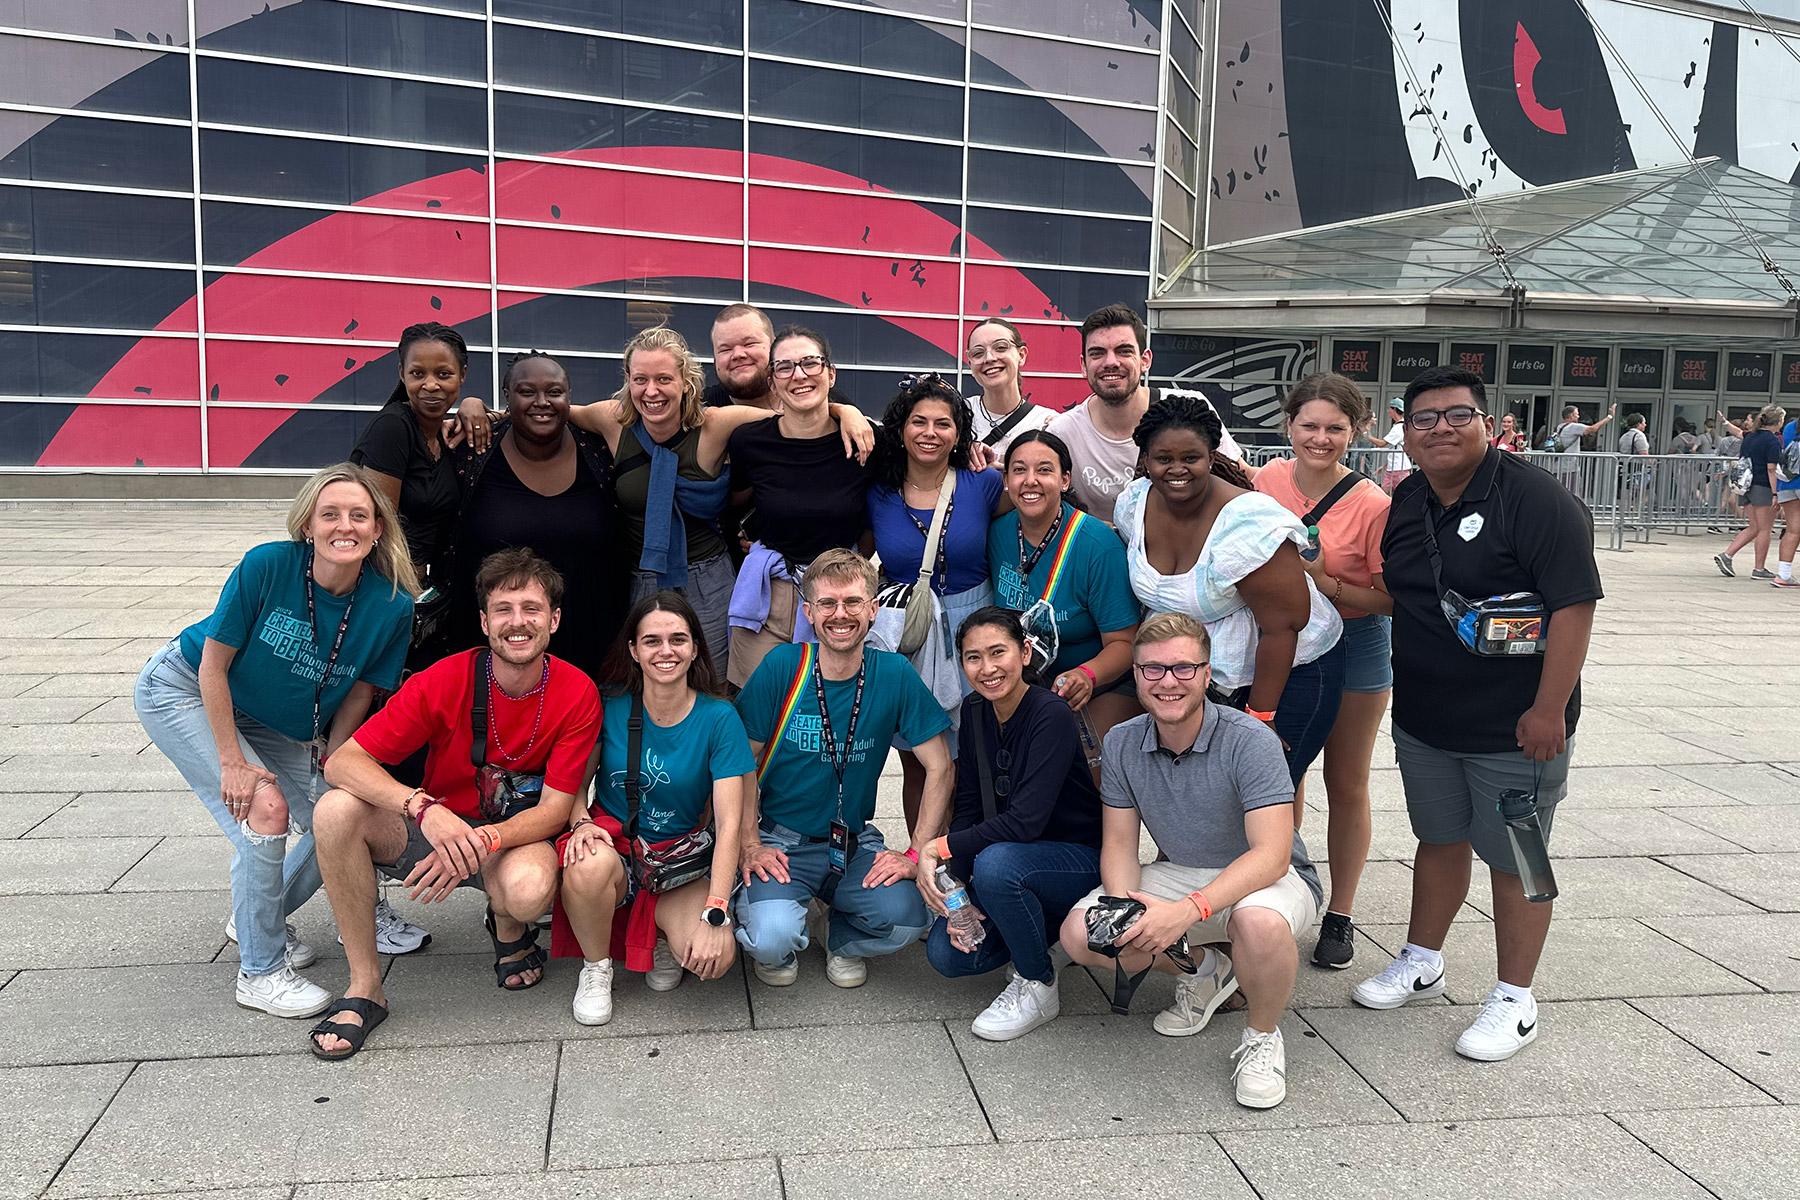 The LWF delegation outside the New Orleans arena where the ELCA Youth Gathering took place. Photo: LWF